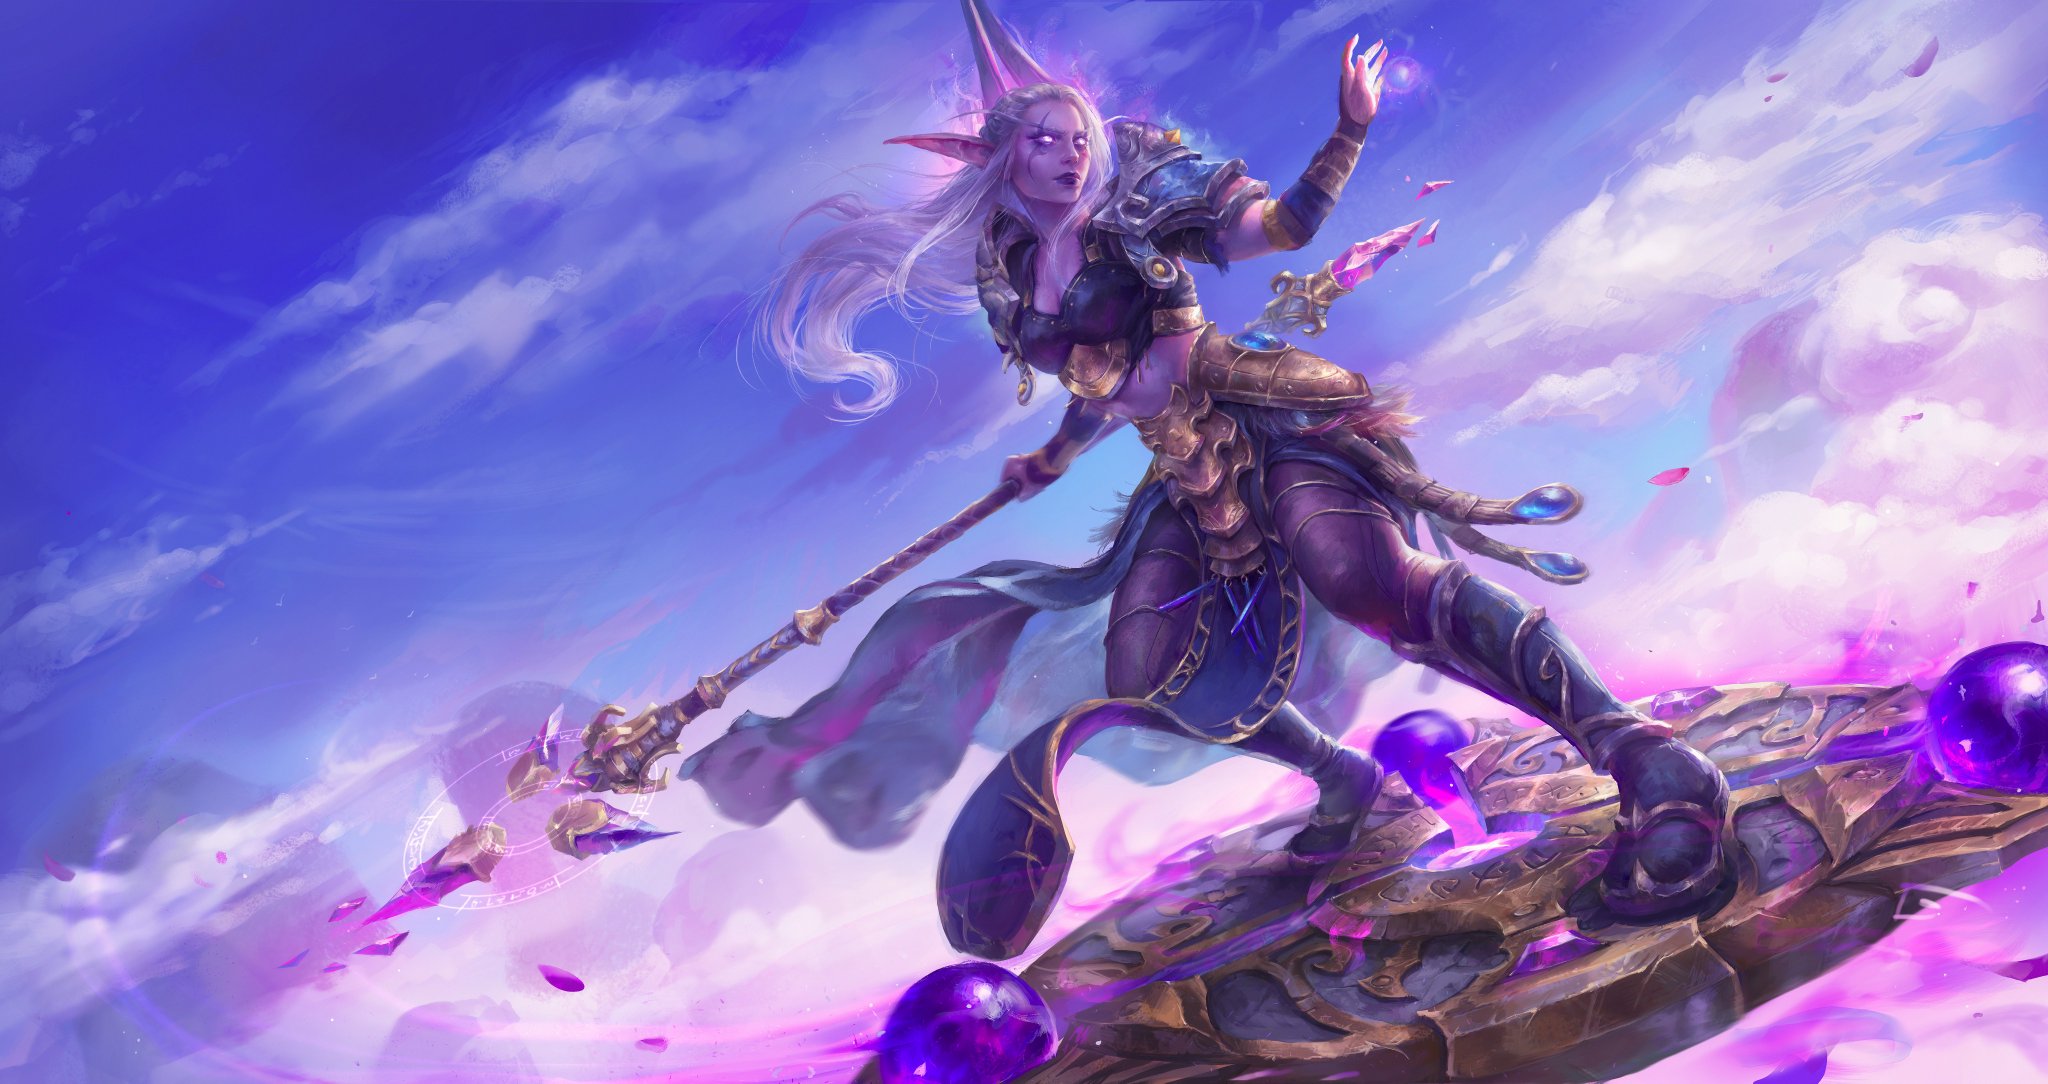 General 2048x1084 World of Warcraft night elves sorcerer white hair World of Warcraft: Legion staff magician PC gaming video game girls pointy ears fantasy art fantasy girl